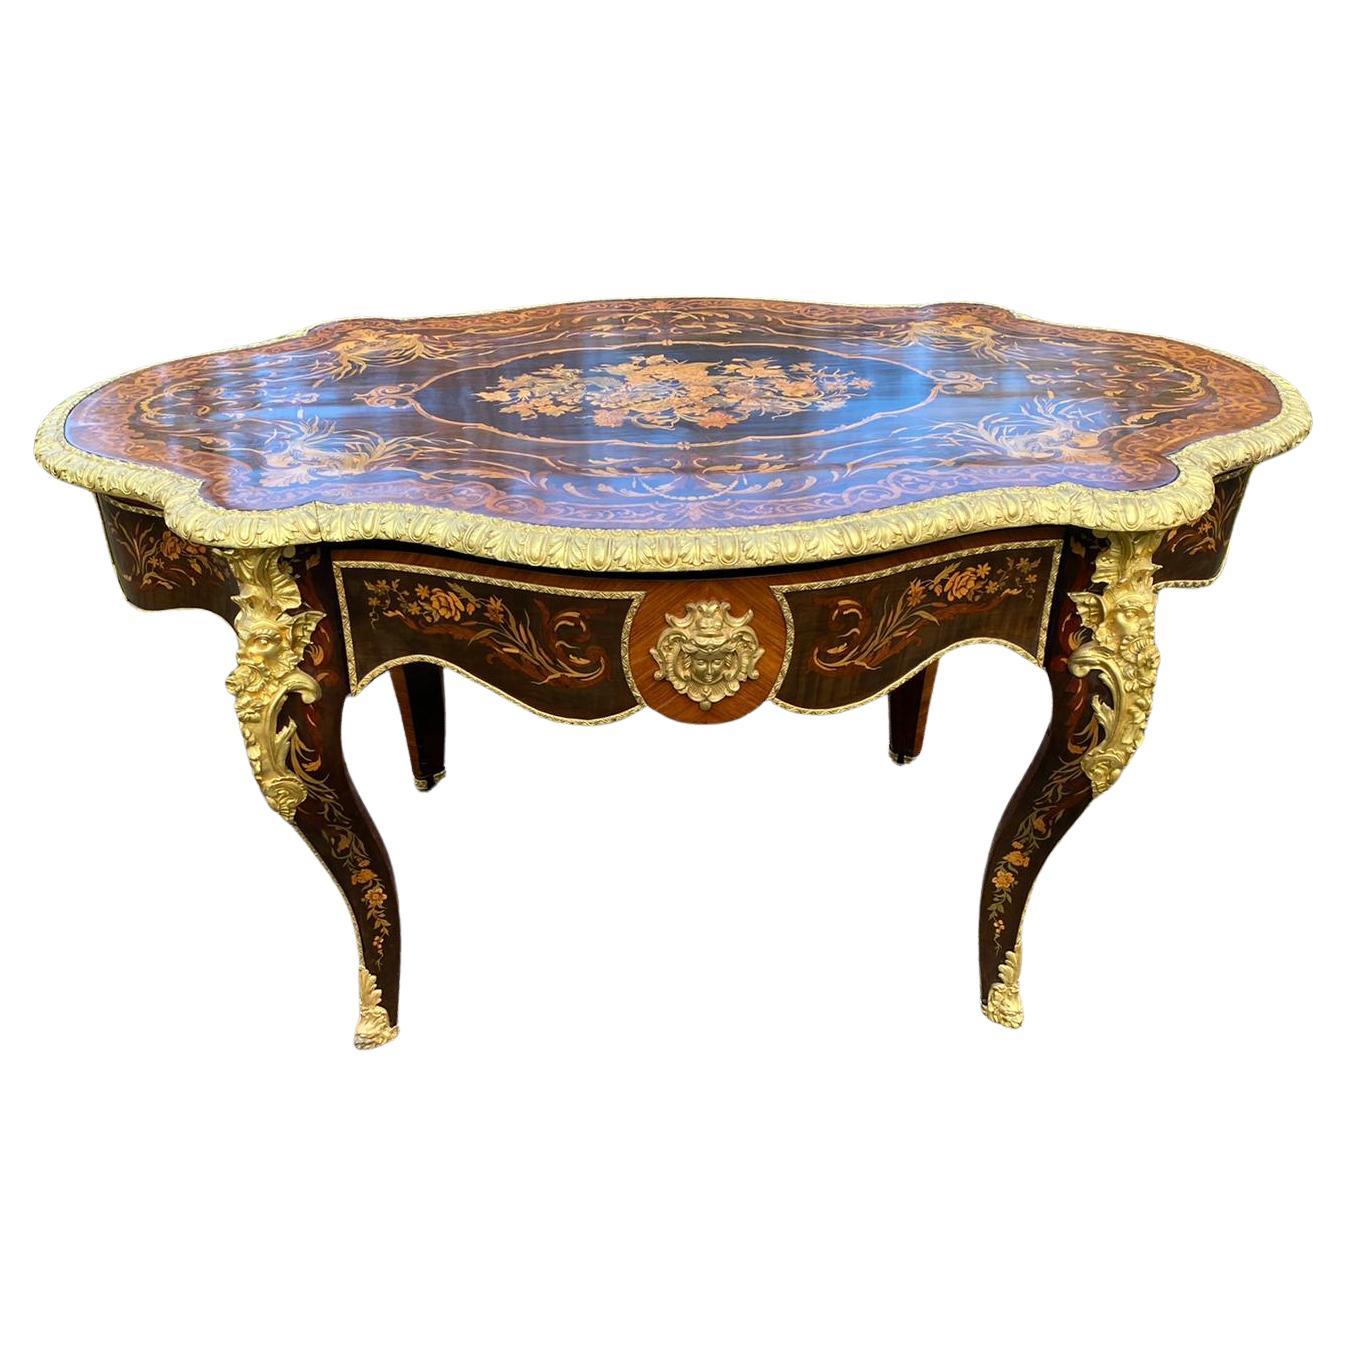 Impressive Table First Empire Napoleon III Early 19th Century For Sale